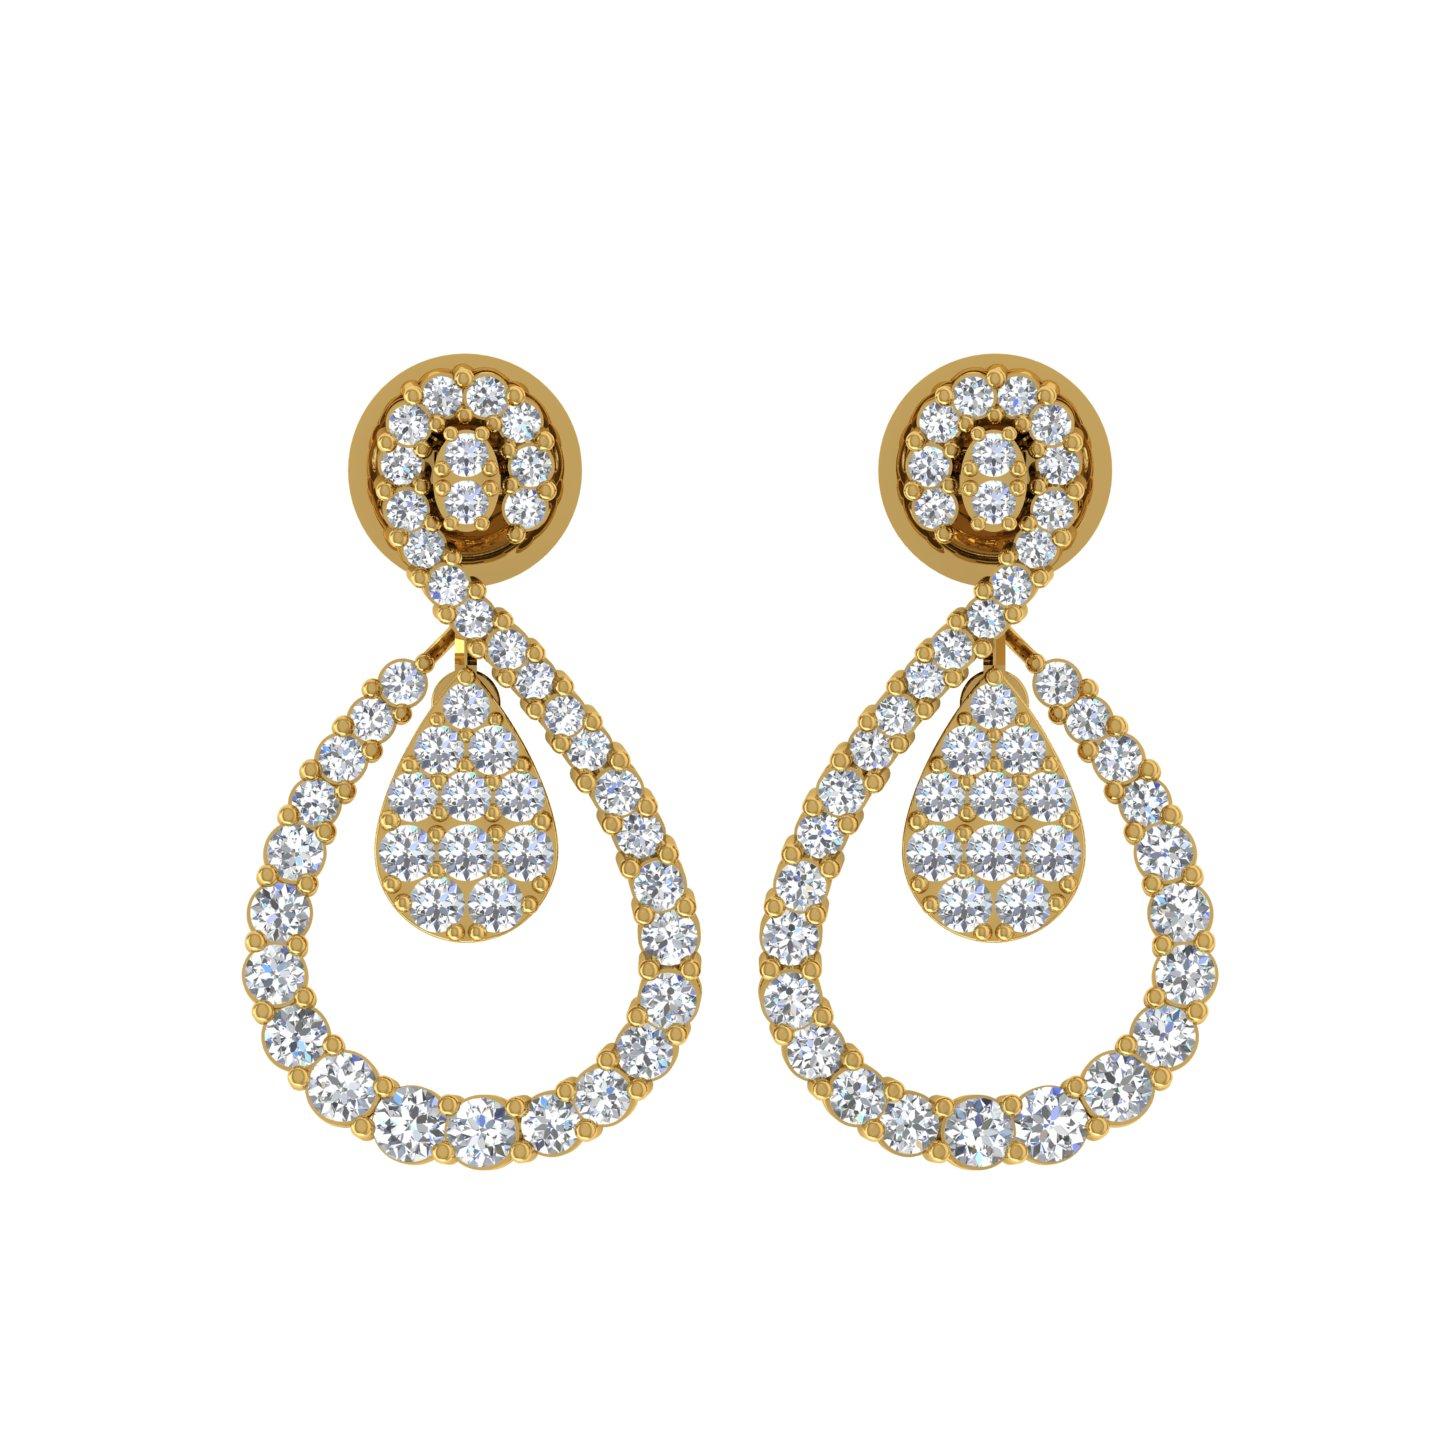 Item Code :- SEE-13070
Gross Wt. :- 6.45 gm
18k Solid Yellow Gold Wt. :- 6.10 gm
Natural Diamond Wt. :- 1.75 Ct. ( SI Clarity & HI Color )
Earrings Size :- 25 mm approx.

✦ Sizing
.....................
We can adjust most items to fit your sizing